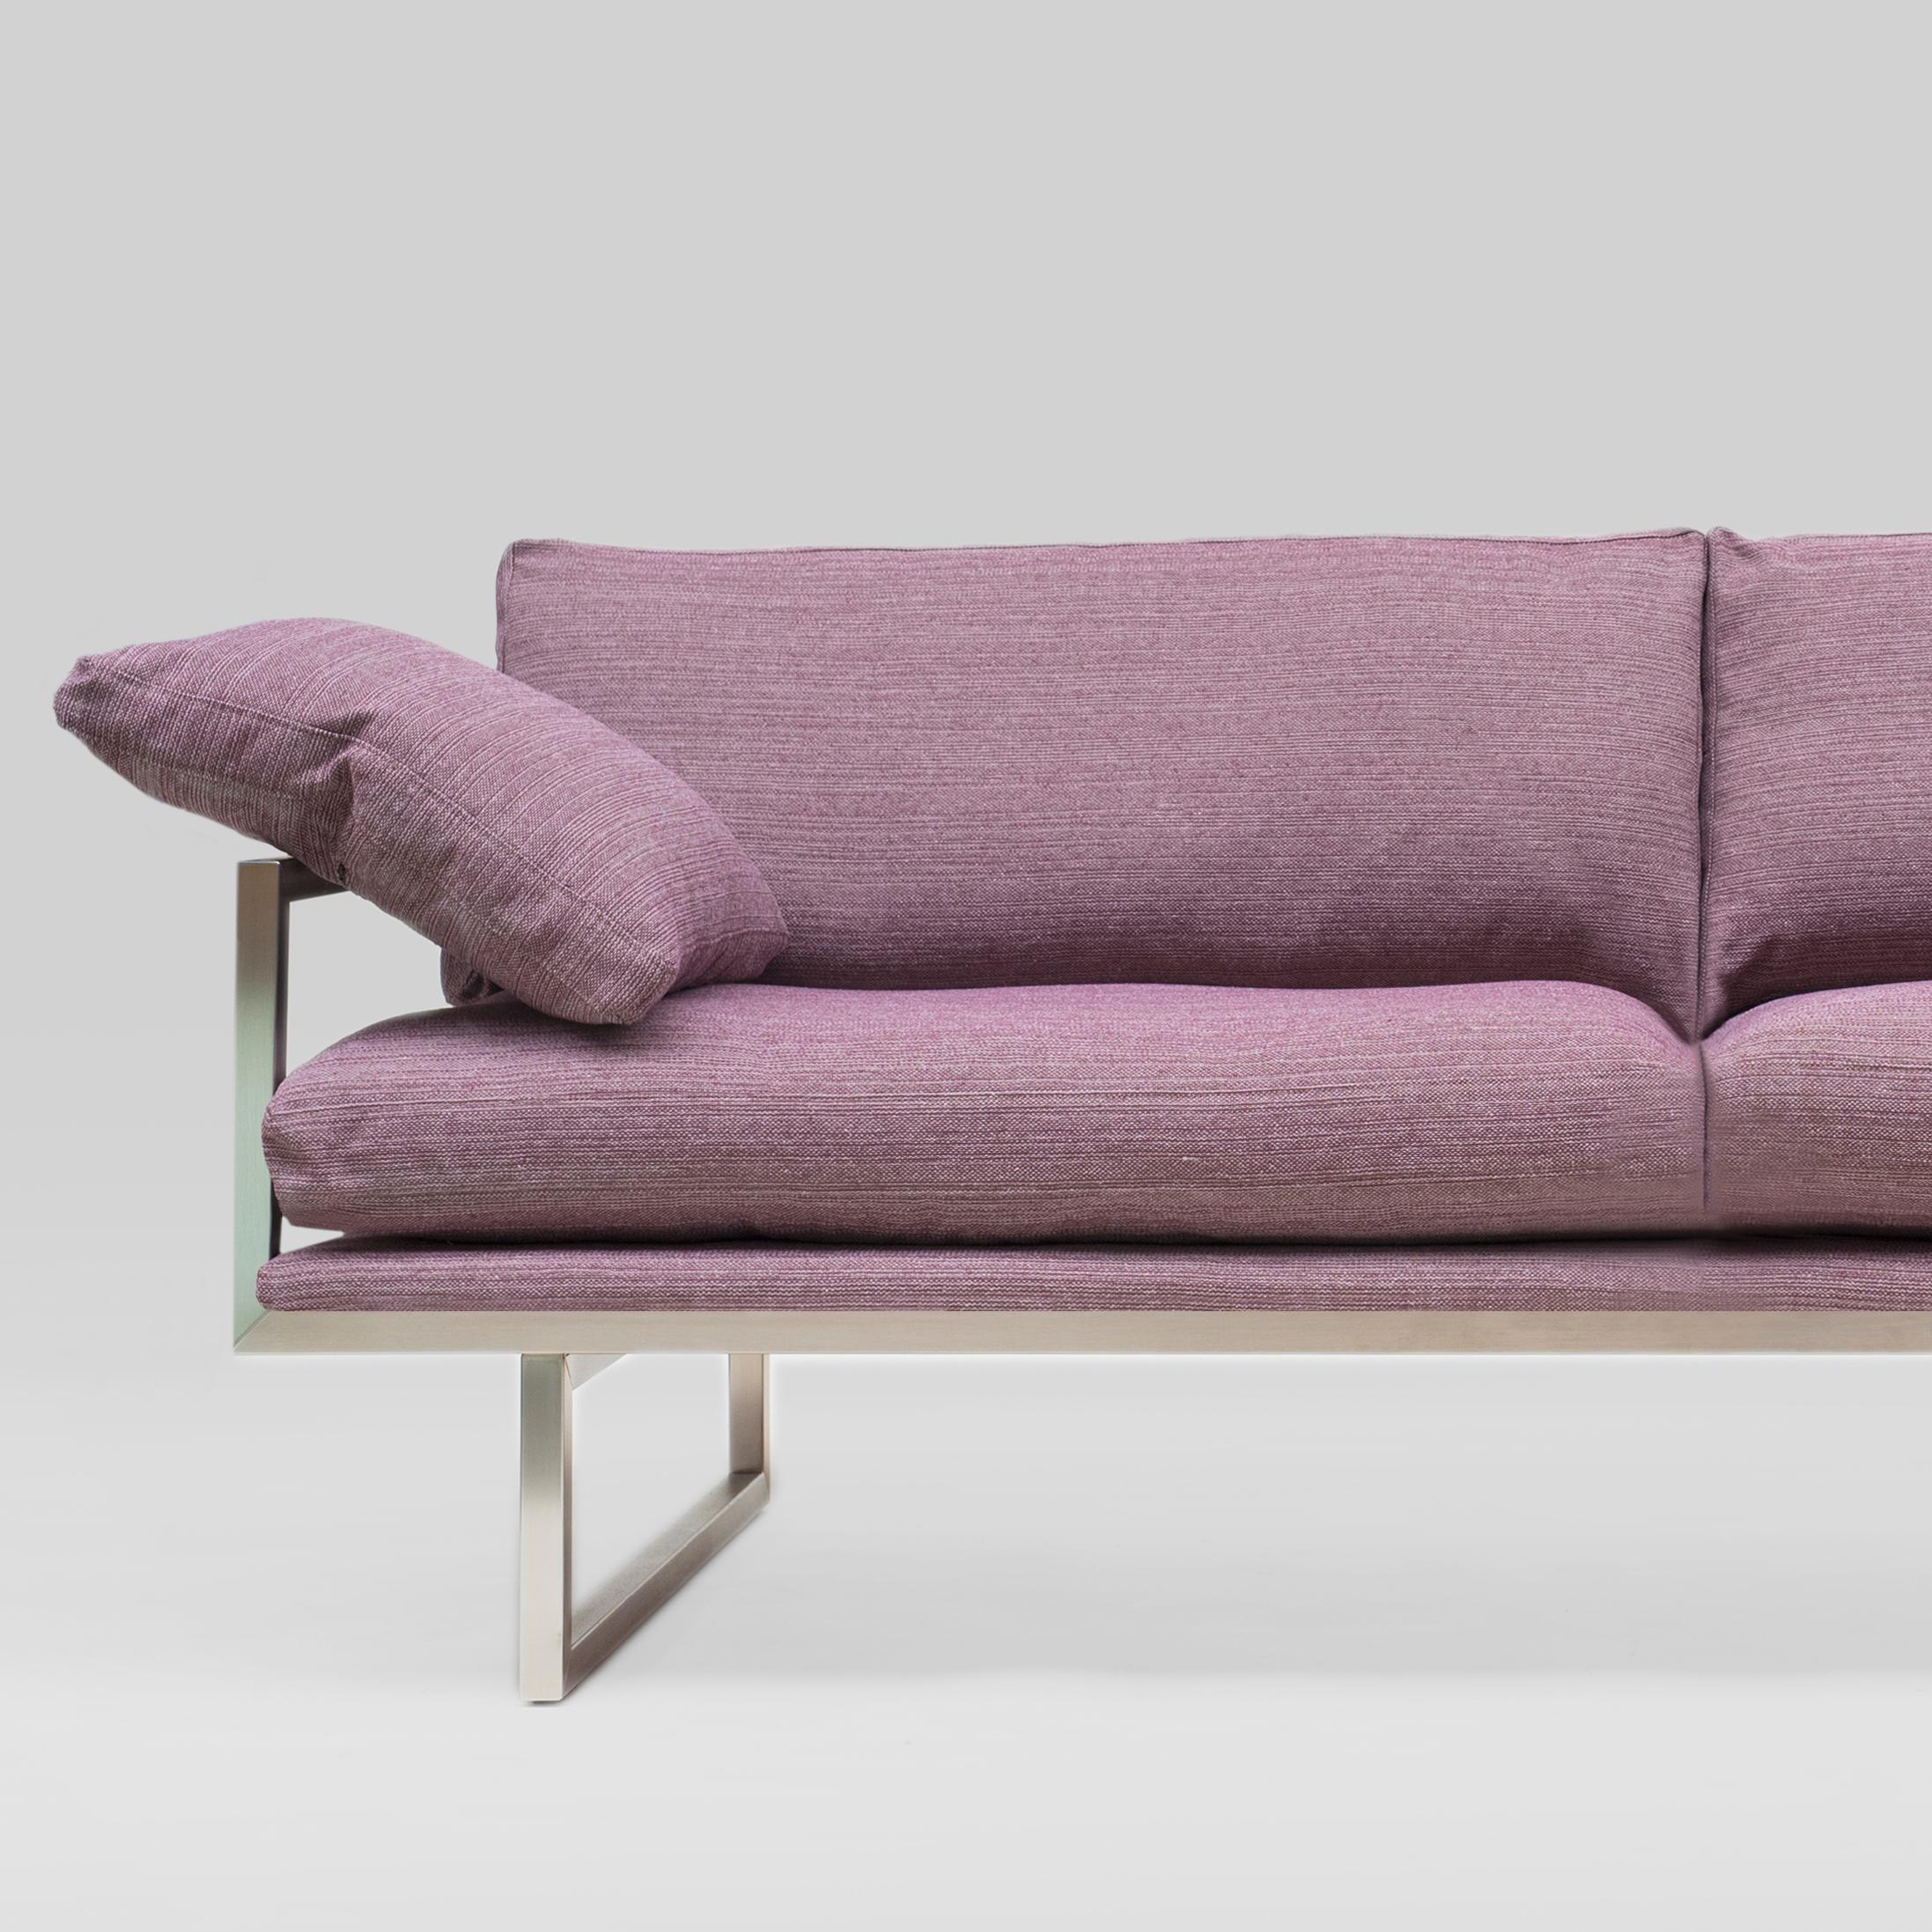 Sofa designed by Peter Ghyczy in 2009.
Manufactured by Ghyczy (Netherlands)

This sofa has an airy and light weight architectural construction. The GP01 is designed with an adjustable backrest, which allows to adjust the seat depth.

Material and